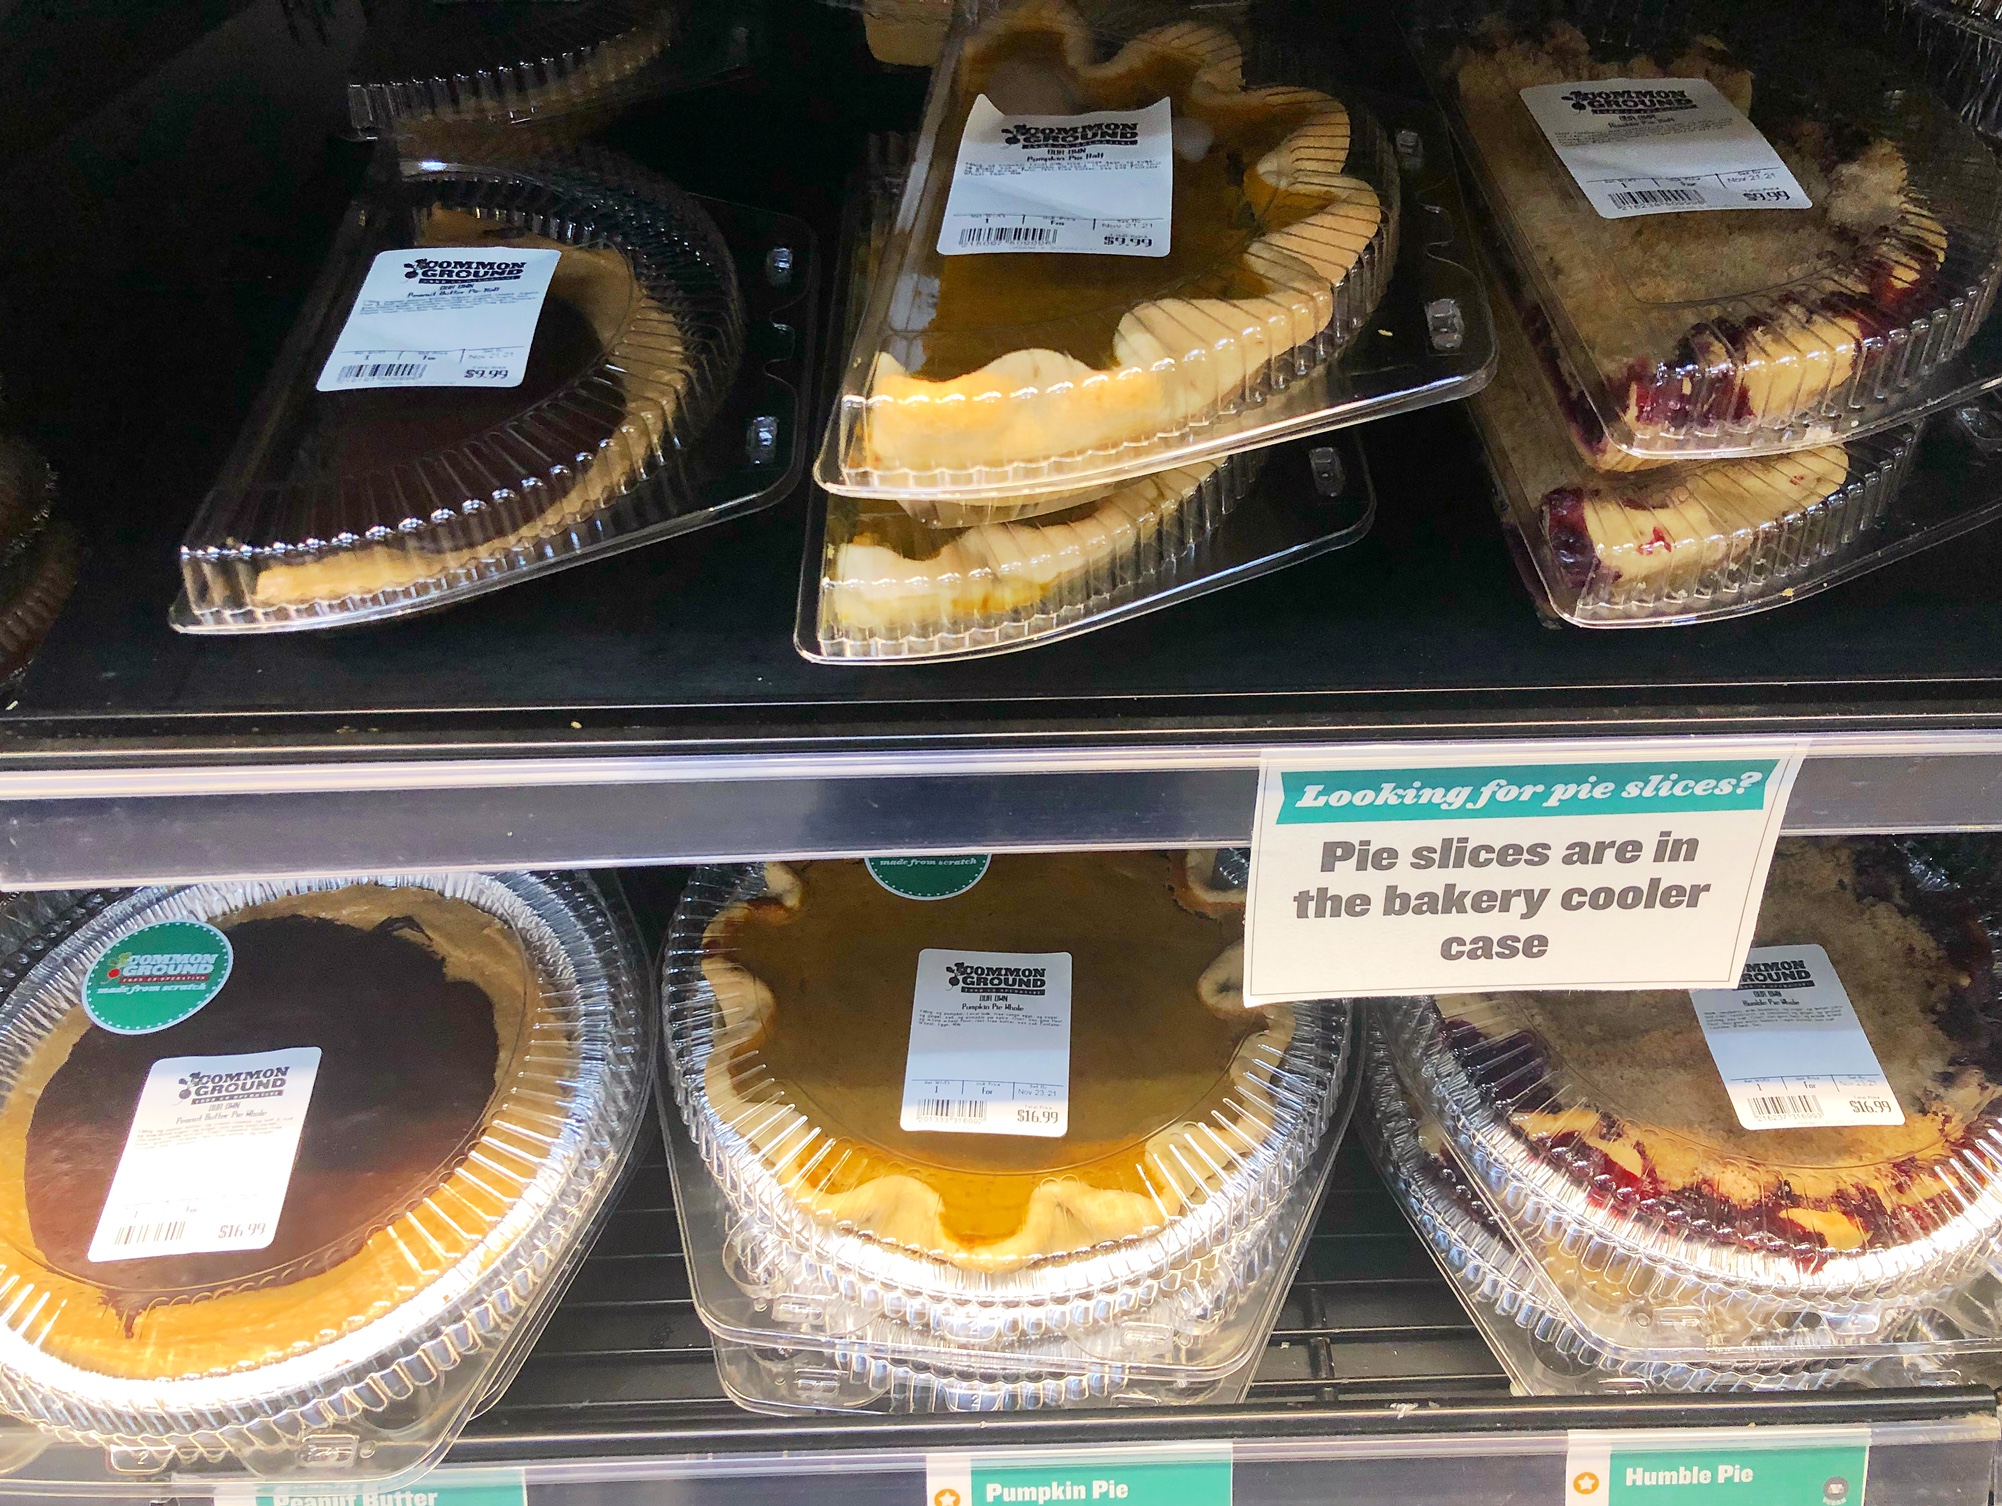 On the shelves at Common Ground, there are half pies in a tin with a plastic cover and full pies in a tin with a plastic cover. The transparent covers reveal a variety of pie flavors. Photo by Alyssa Buckley.